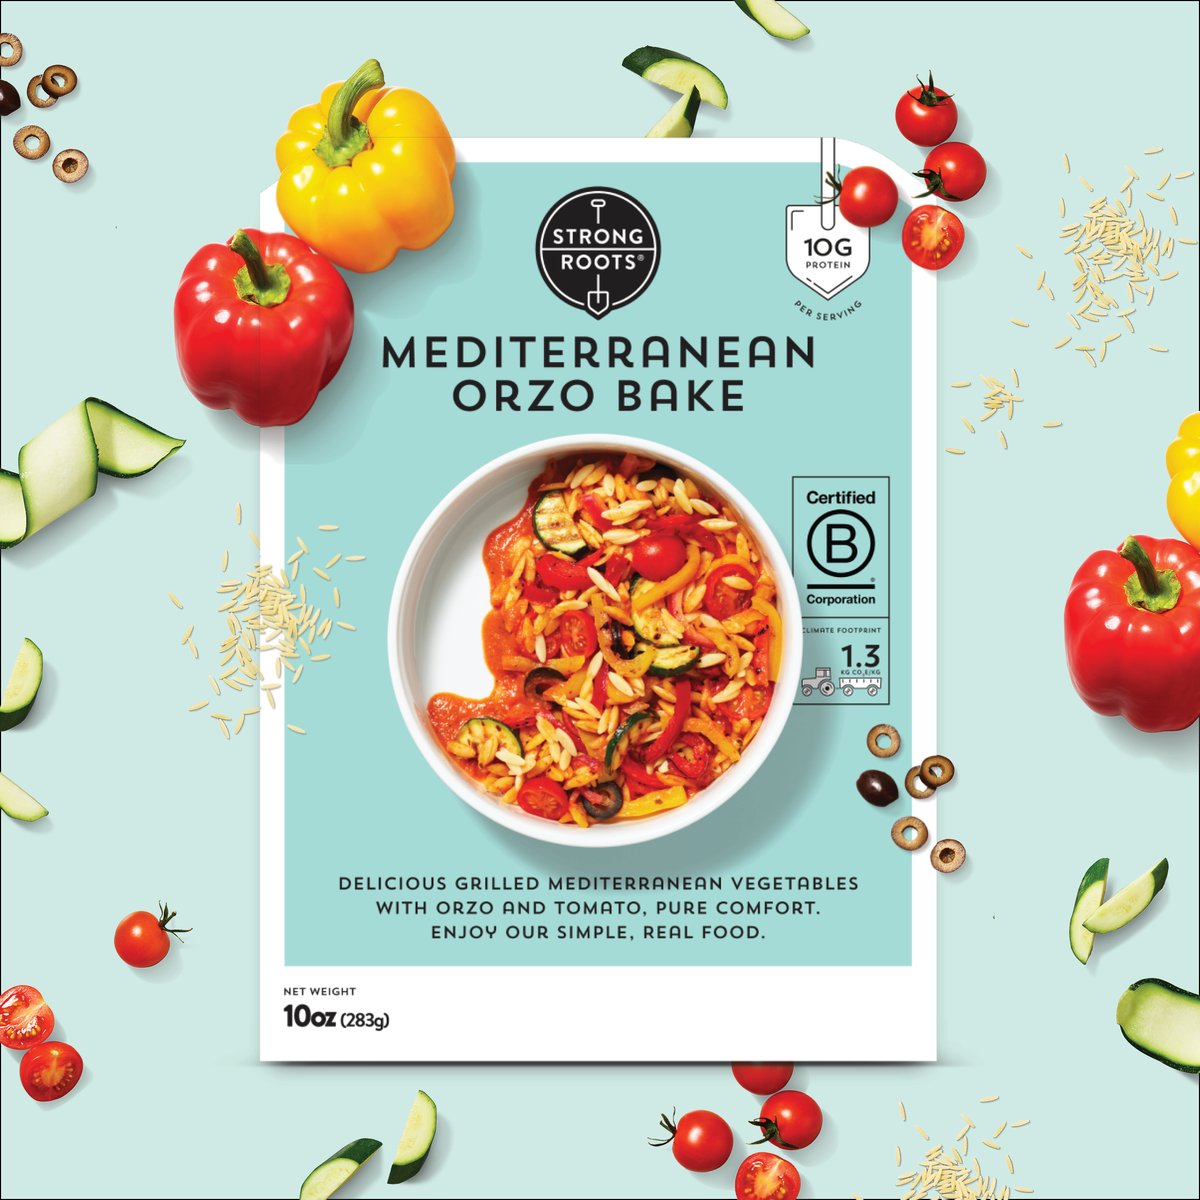 We're savoring simplicity with our quick and easy Mediterranean Orzo Bake—Grilled Mediterranean Vegetables, Orzo, and Tomatoes unite for a delicious, natural, and nutritious delight. Chef's Kiss! 🤌 #FoodPairings #StrongRoots